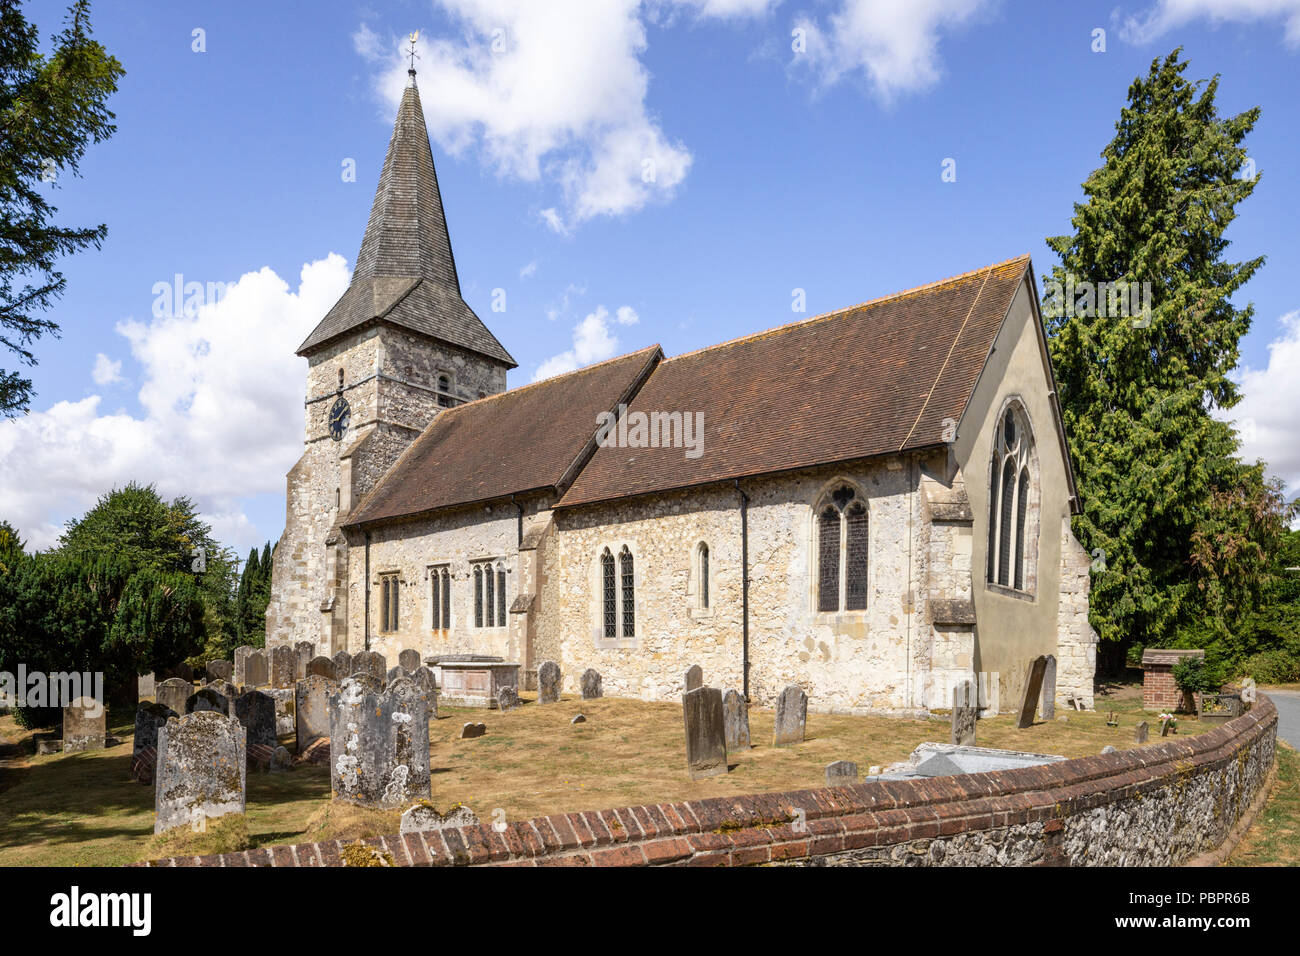 Holybourne, Hampshire, 28 July 2018. The church of the Holy Rood in Holybourne, near Alton, Hampshire where on Saturday 28th July 2018 a solid oak pew was dedicated to the memory of the haemophiliacs who died as the result of being treated with contaminated blood products while at the nearby Treloar College. It is thought that 72 pupils have died out of 89 infected. Stock Photo